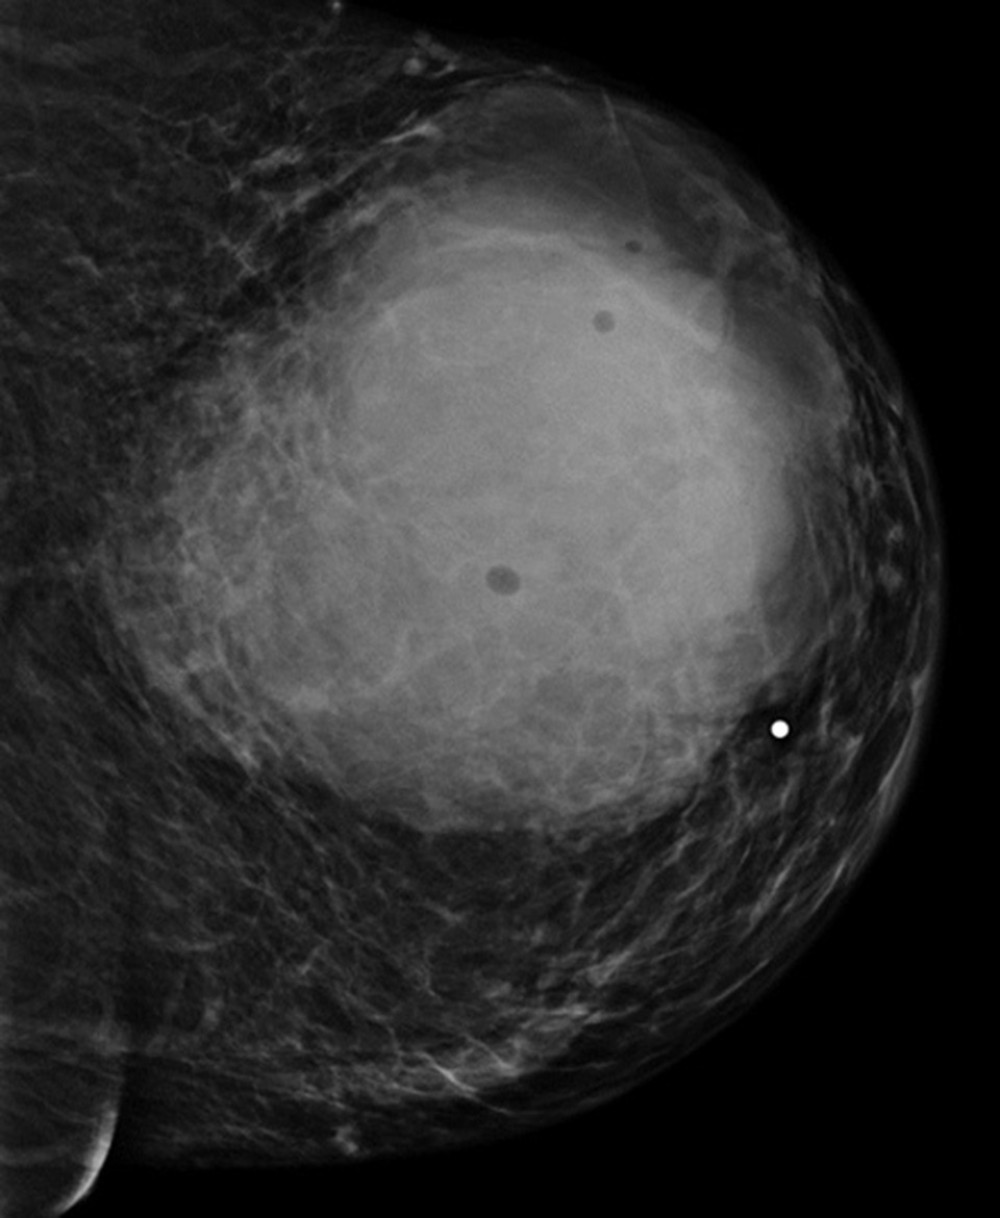 Mammogram showing a 10×10 cm mass in the left breast classified as BI-RADS category 4.